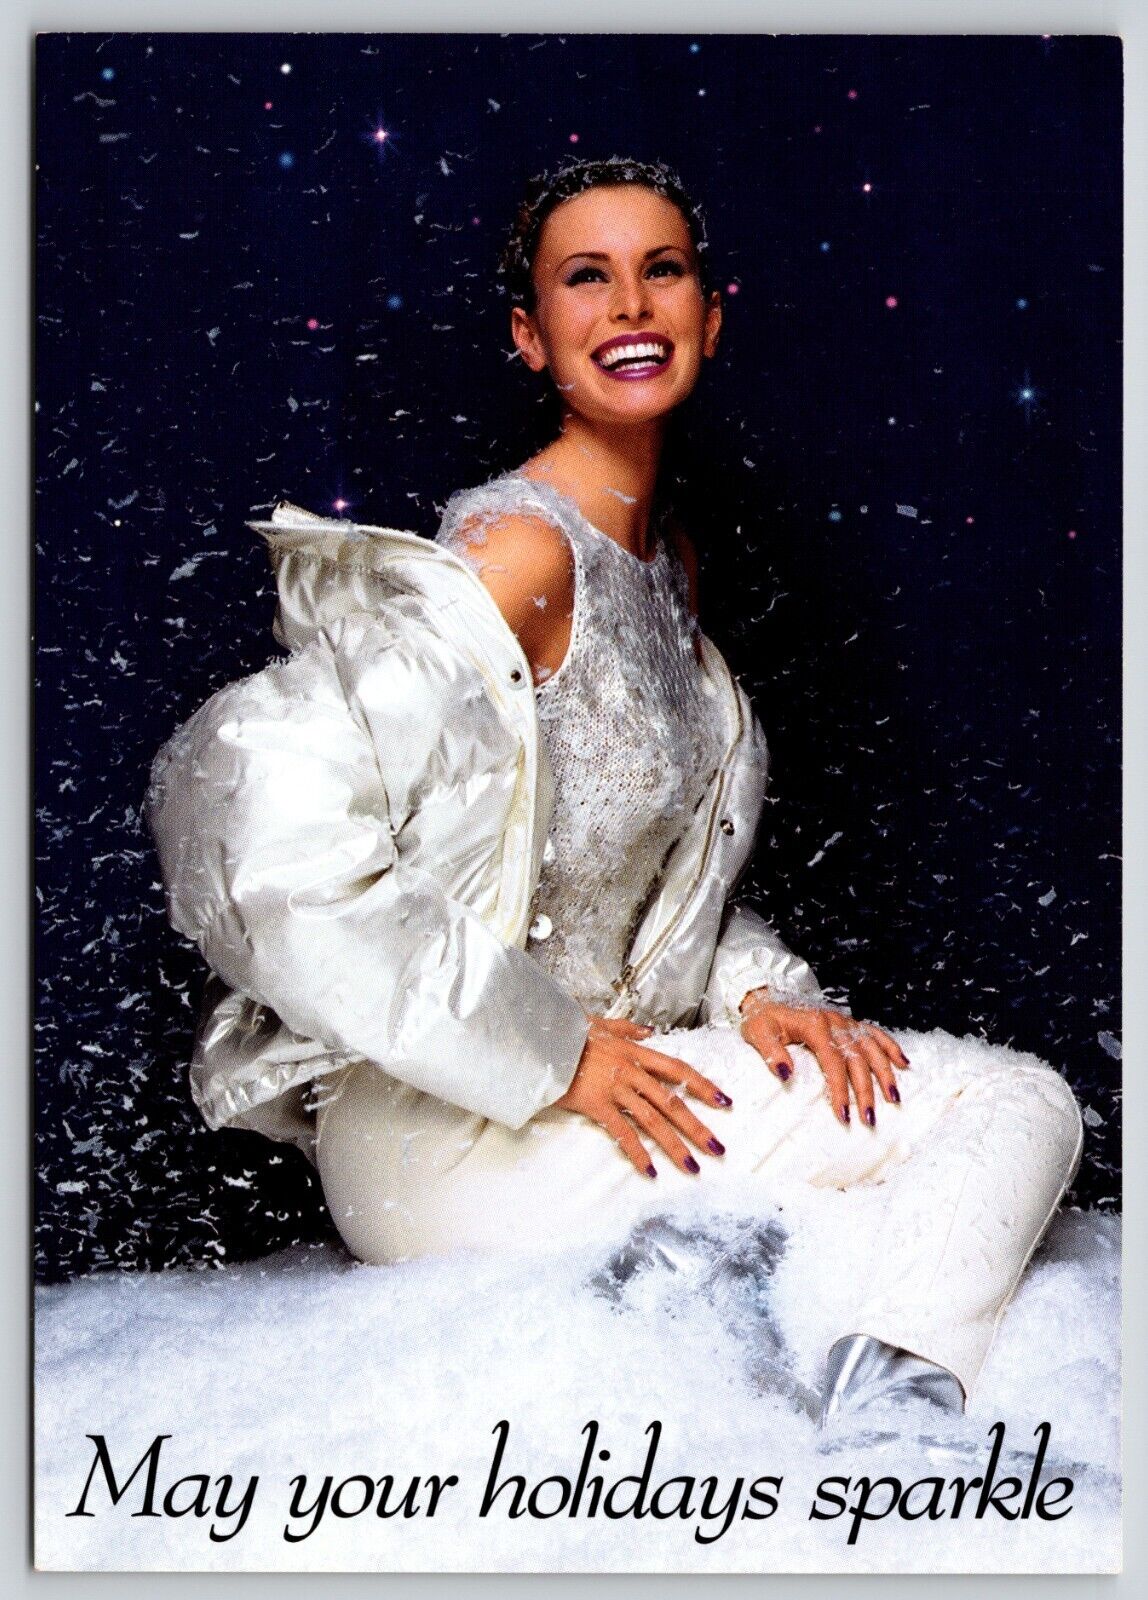 Postcard May Your Holidays Sparkle Cover Girl Advertising Niki Taylor Model